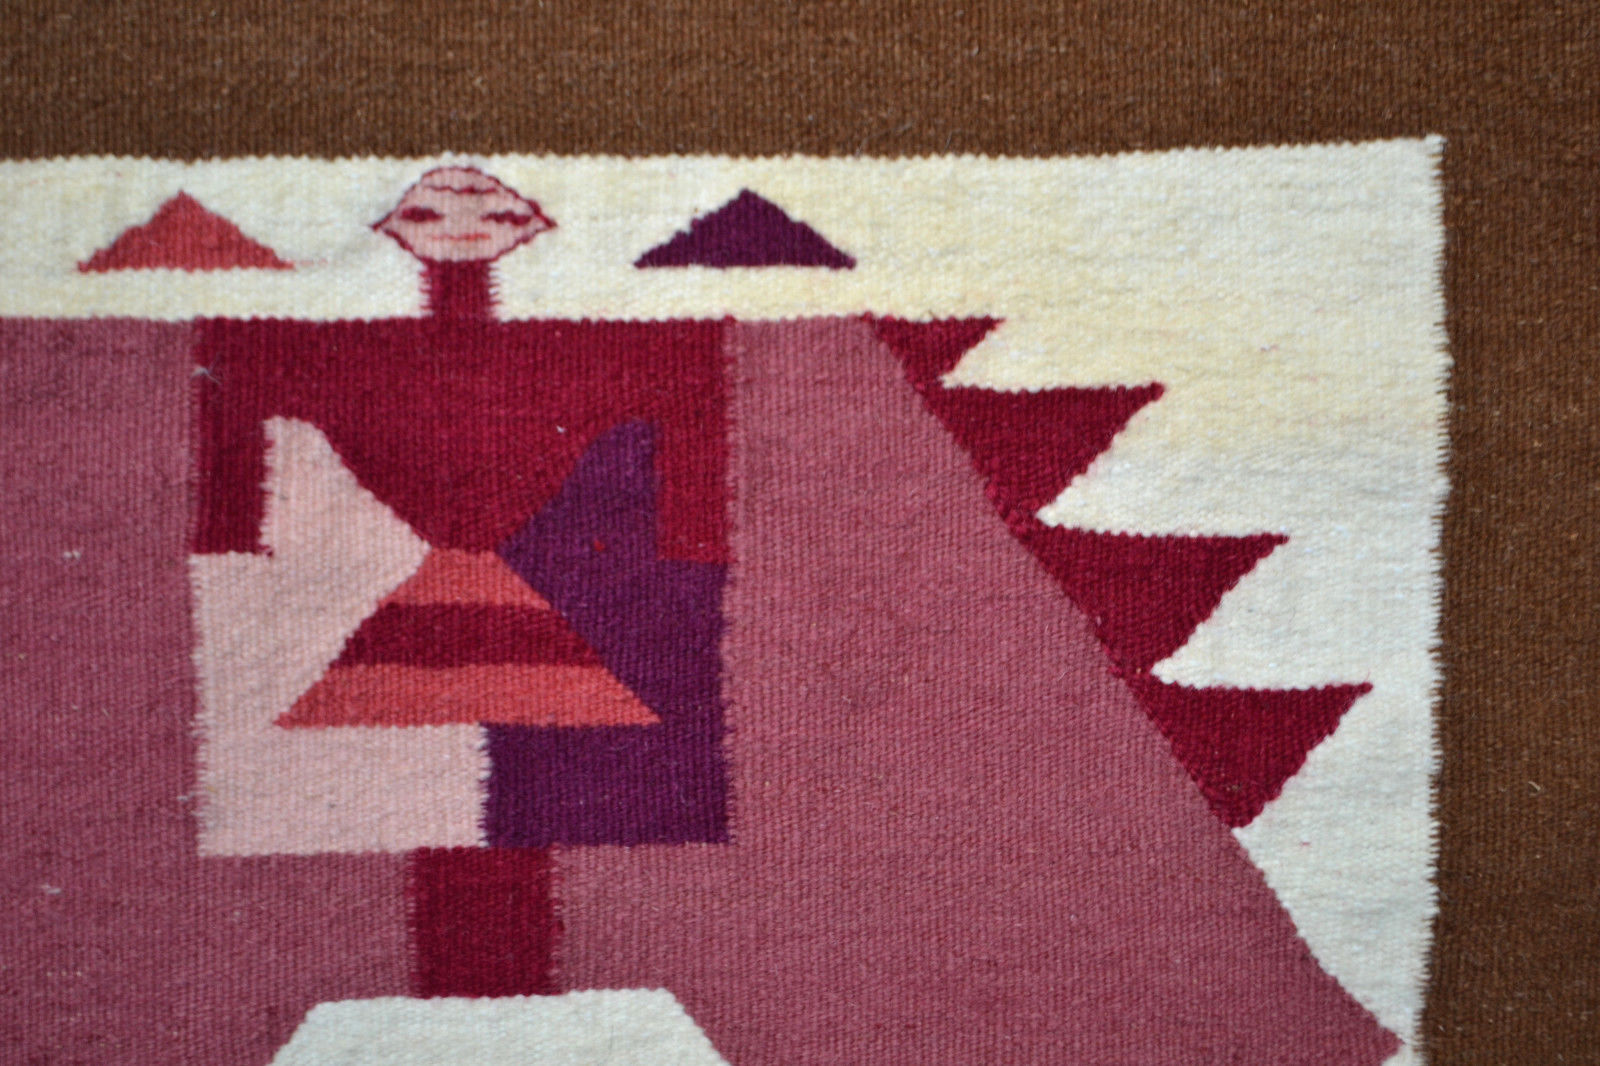 Handmade vintage flat-weave woven in Tunisia in the region of Gafsa around 1960s. This kilim is in original good condition.